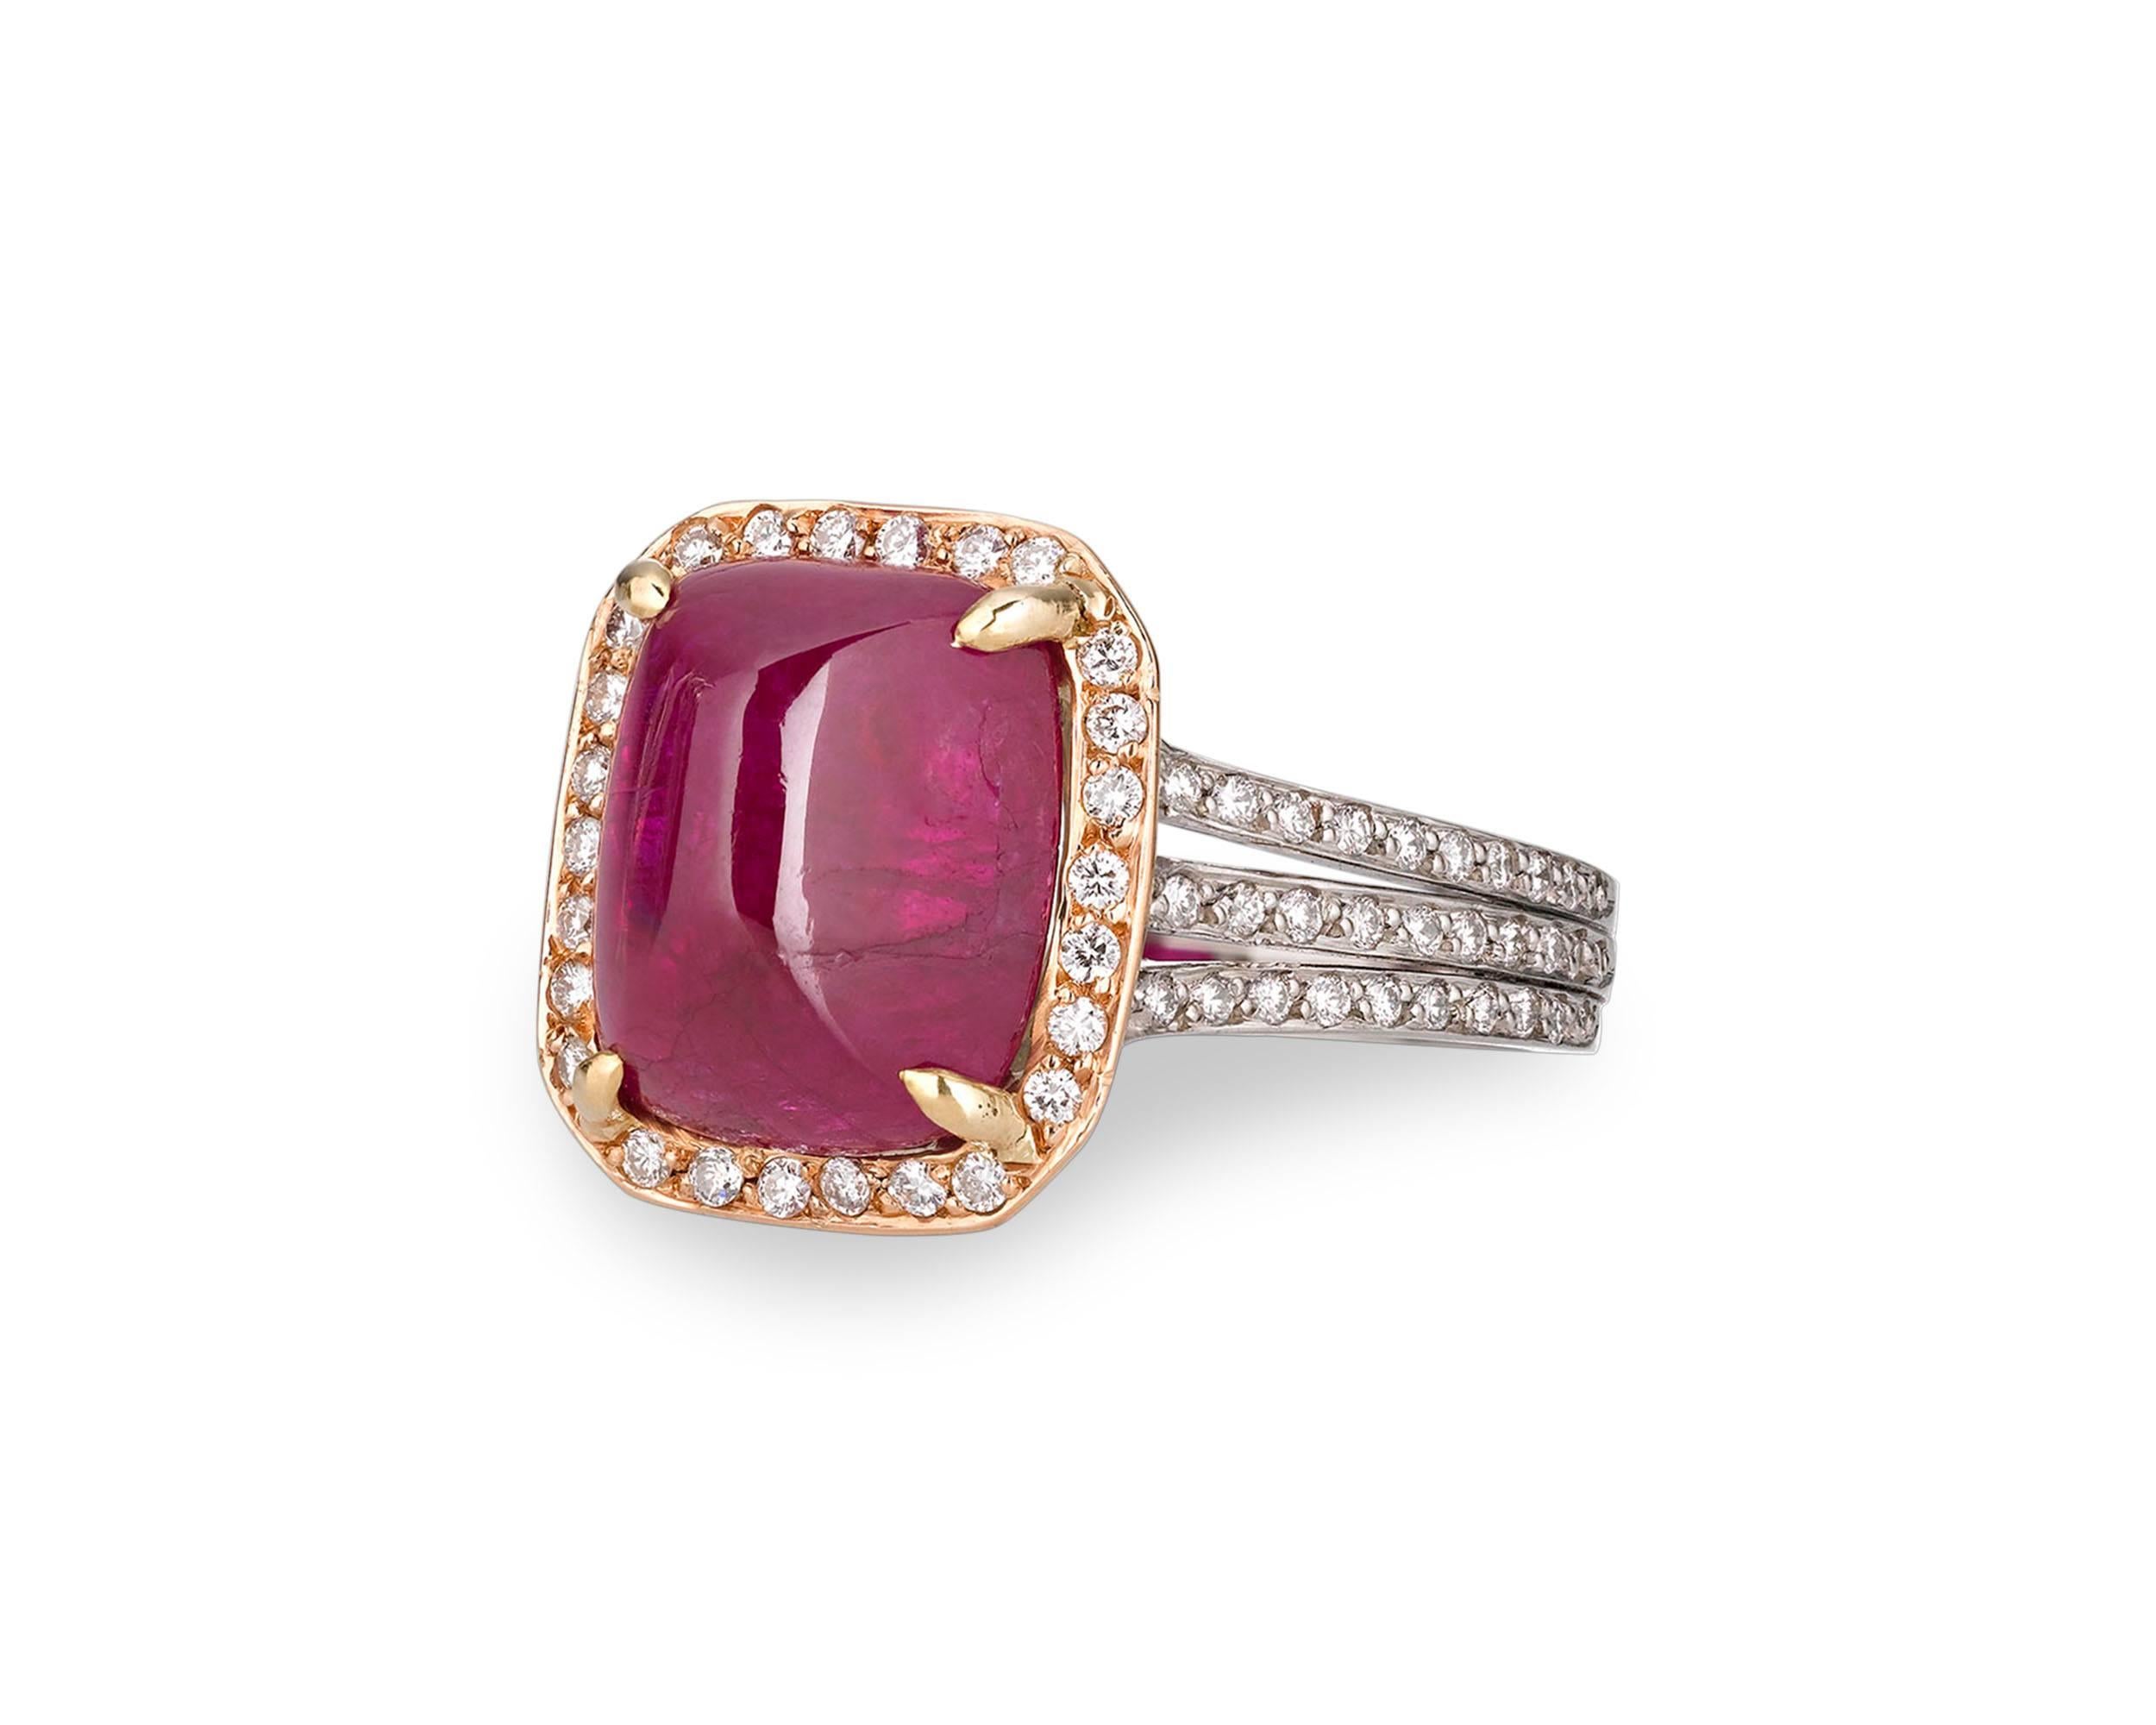 A rare Burma cabochon ruby positively captivates amid a halo of diamonds in this extraordinary ring. The exceptional jewel weighs 6.31 carats and its sugarloaf cut perfectly showcases the intense red hue for which Burma rubies are so coveted.